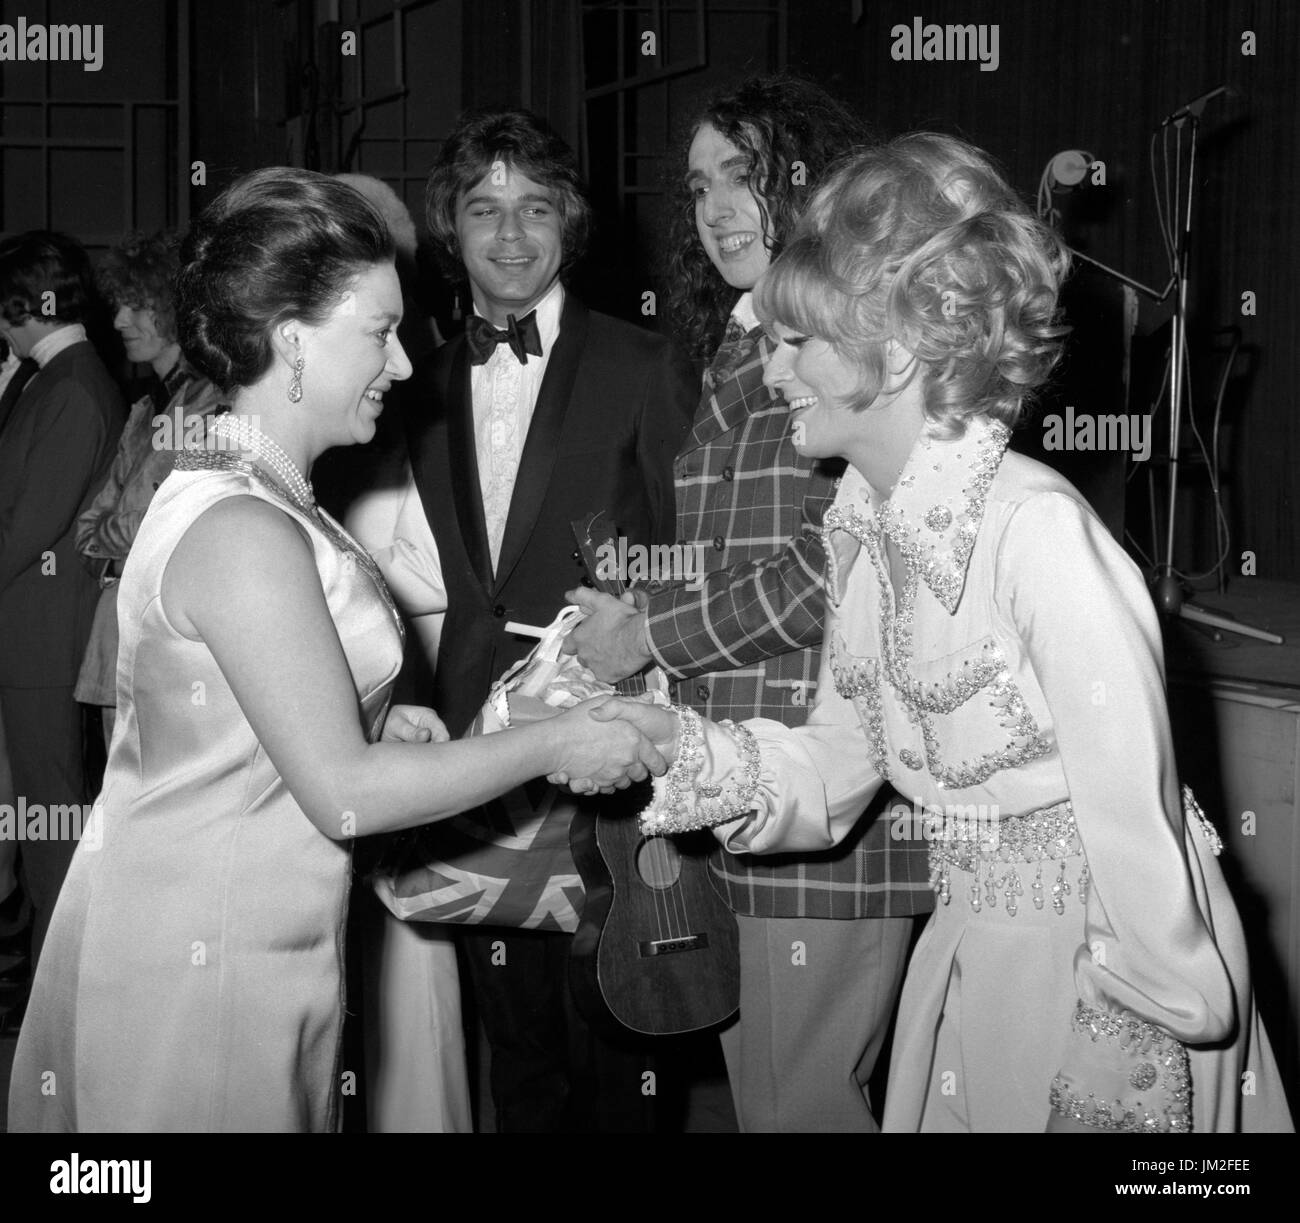 Princess Margaret, the President of the Invalid Children's Aid Association (ICAA), meets singer Dusty Springfield (r) at the London Palladium, scene of this year's Save Rave charity show which aided the ICAA. Looking on are entertainers Lou Christie and Tiny tim (in check coat). Stock Photo